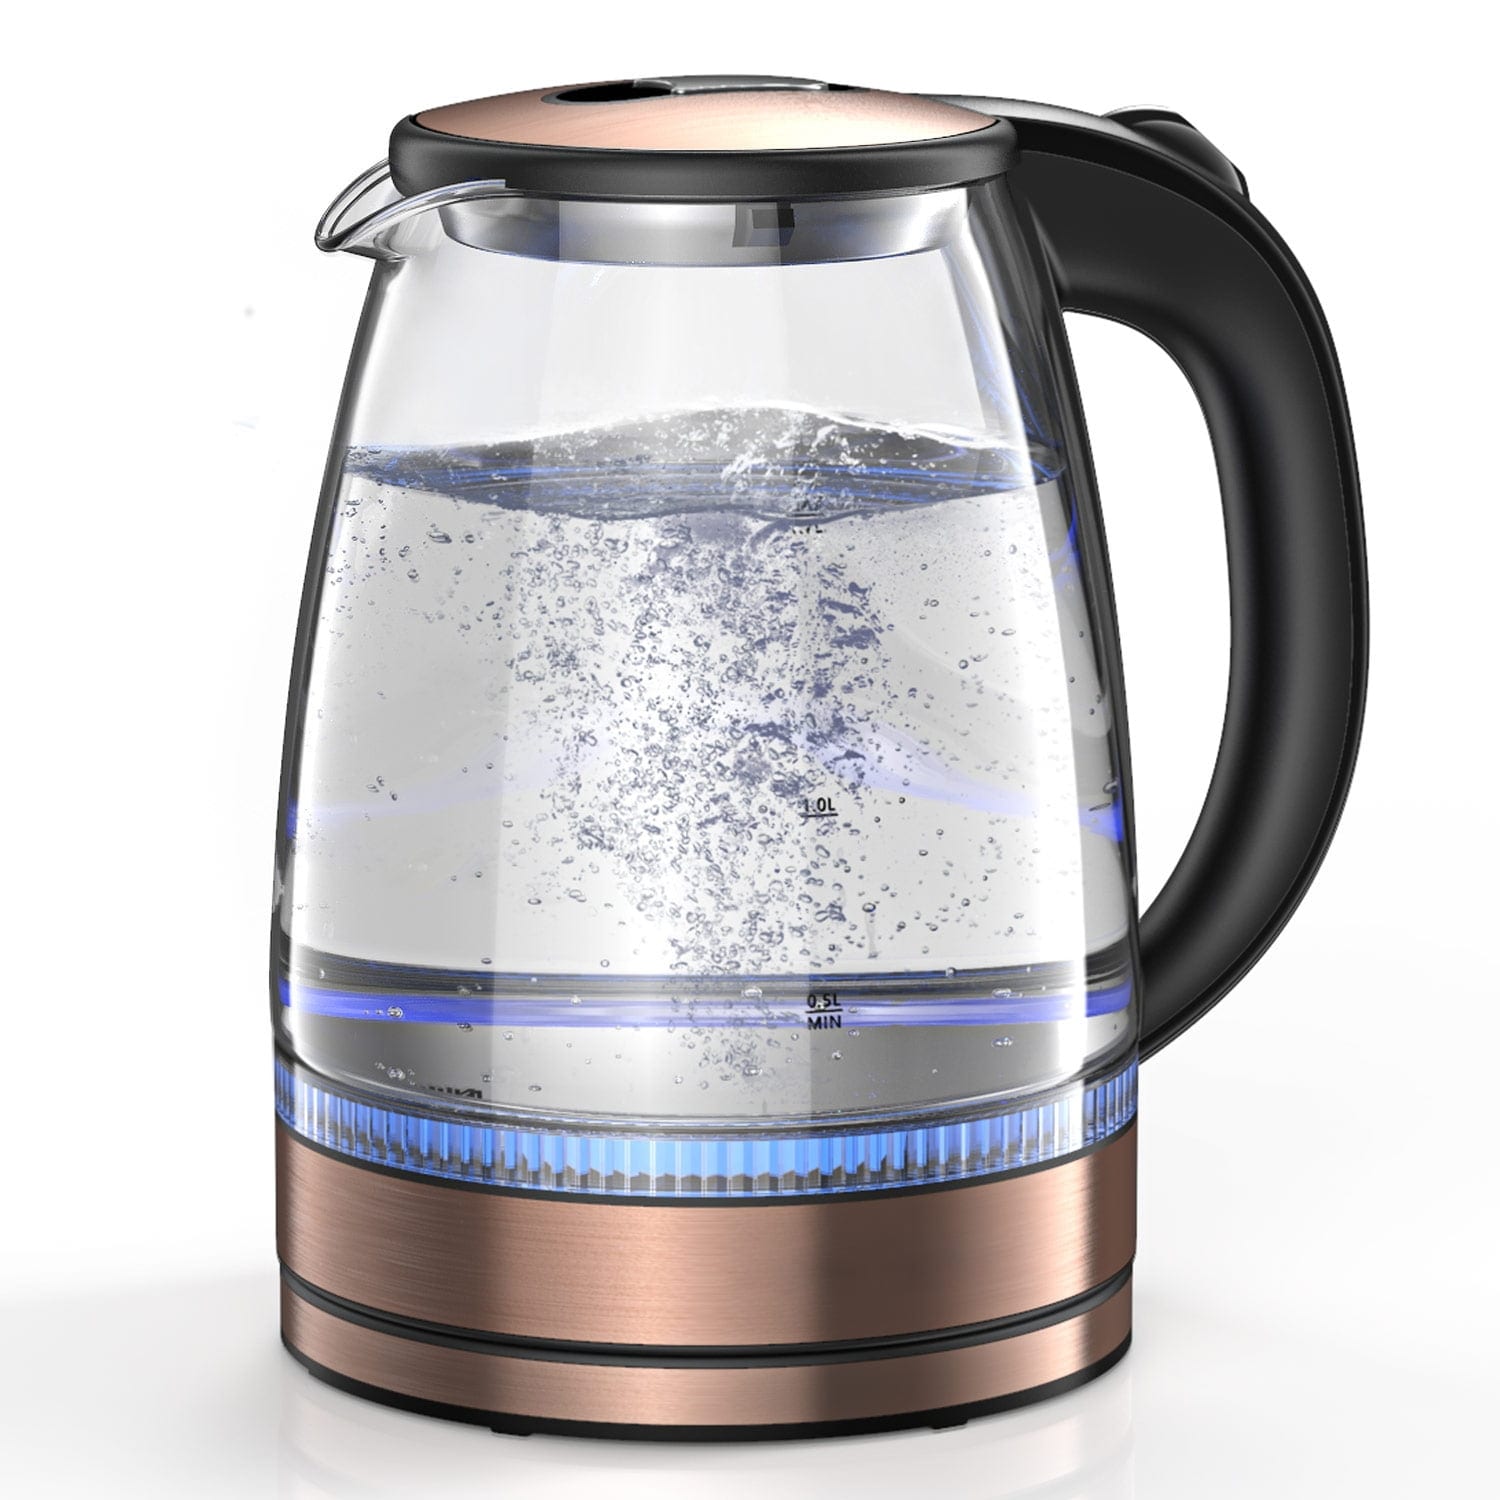 https://ak1.ostkcdn.com/images/products/is/images/direct/e1e1defc2d17038b0337160f46ae667af06facff/1.7L-Glass-Boiler-Electric-Tea-Kettle-with-Blue-LED-Indicator-Light.jpg